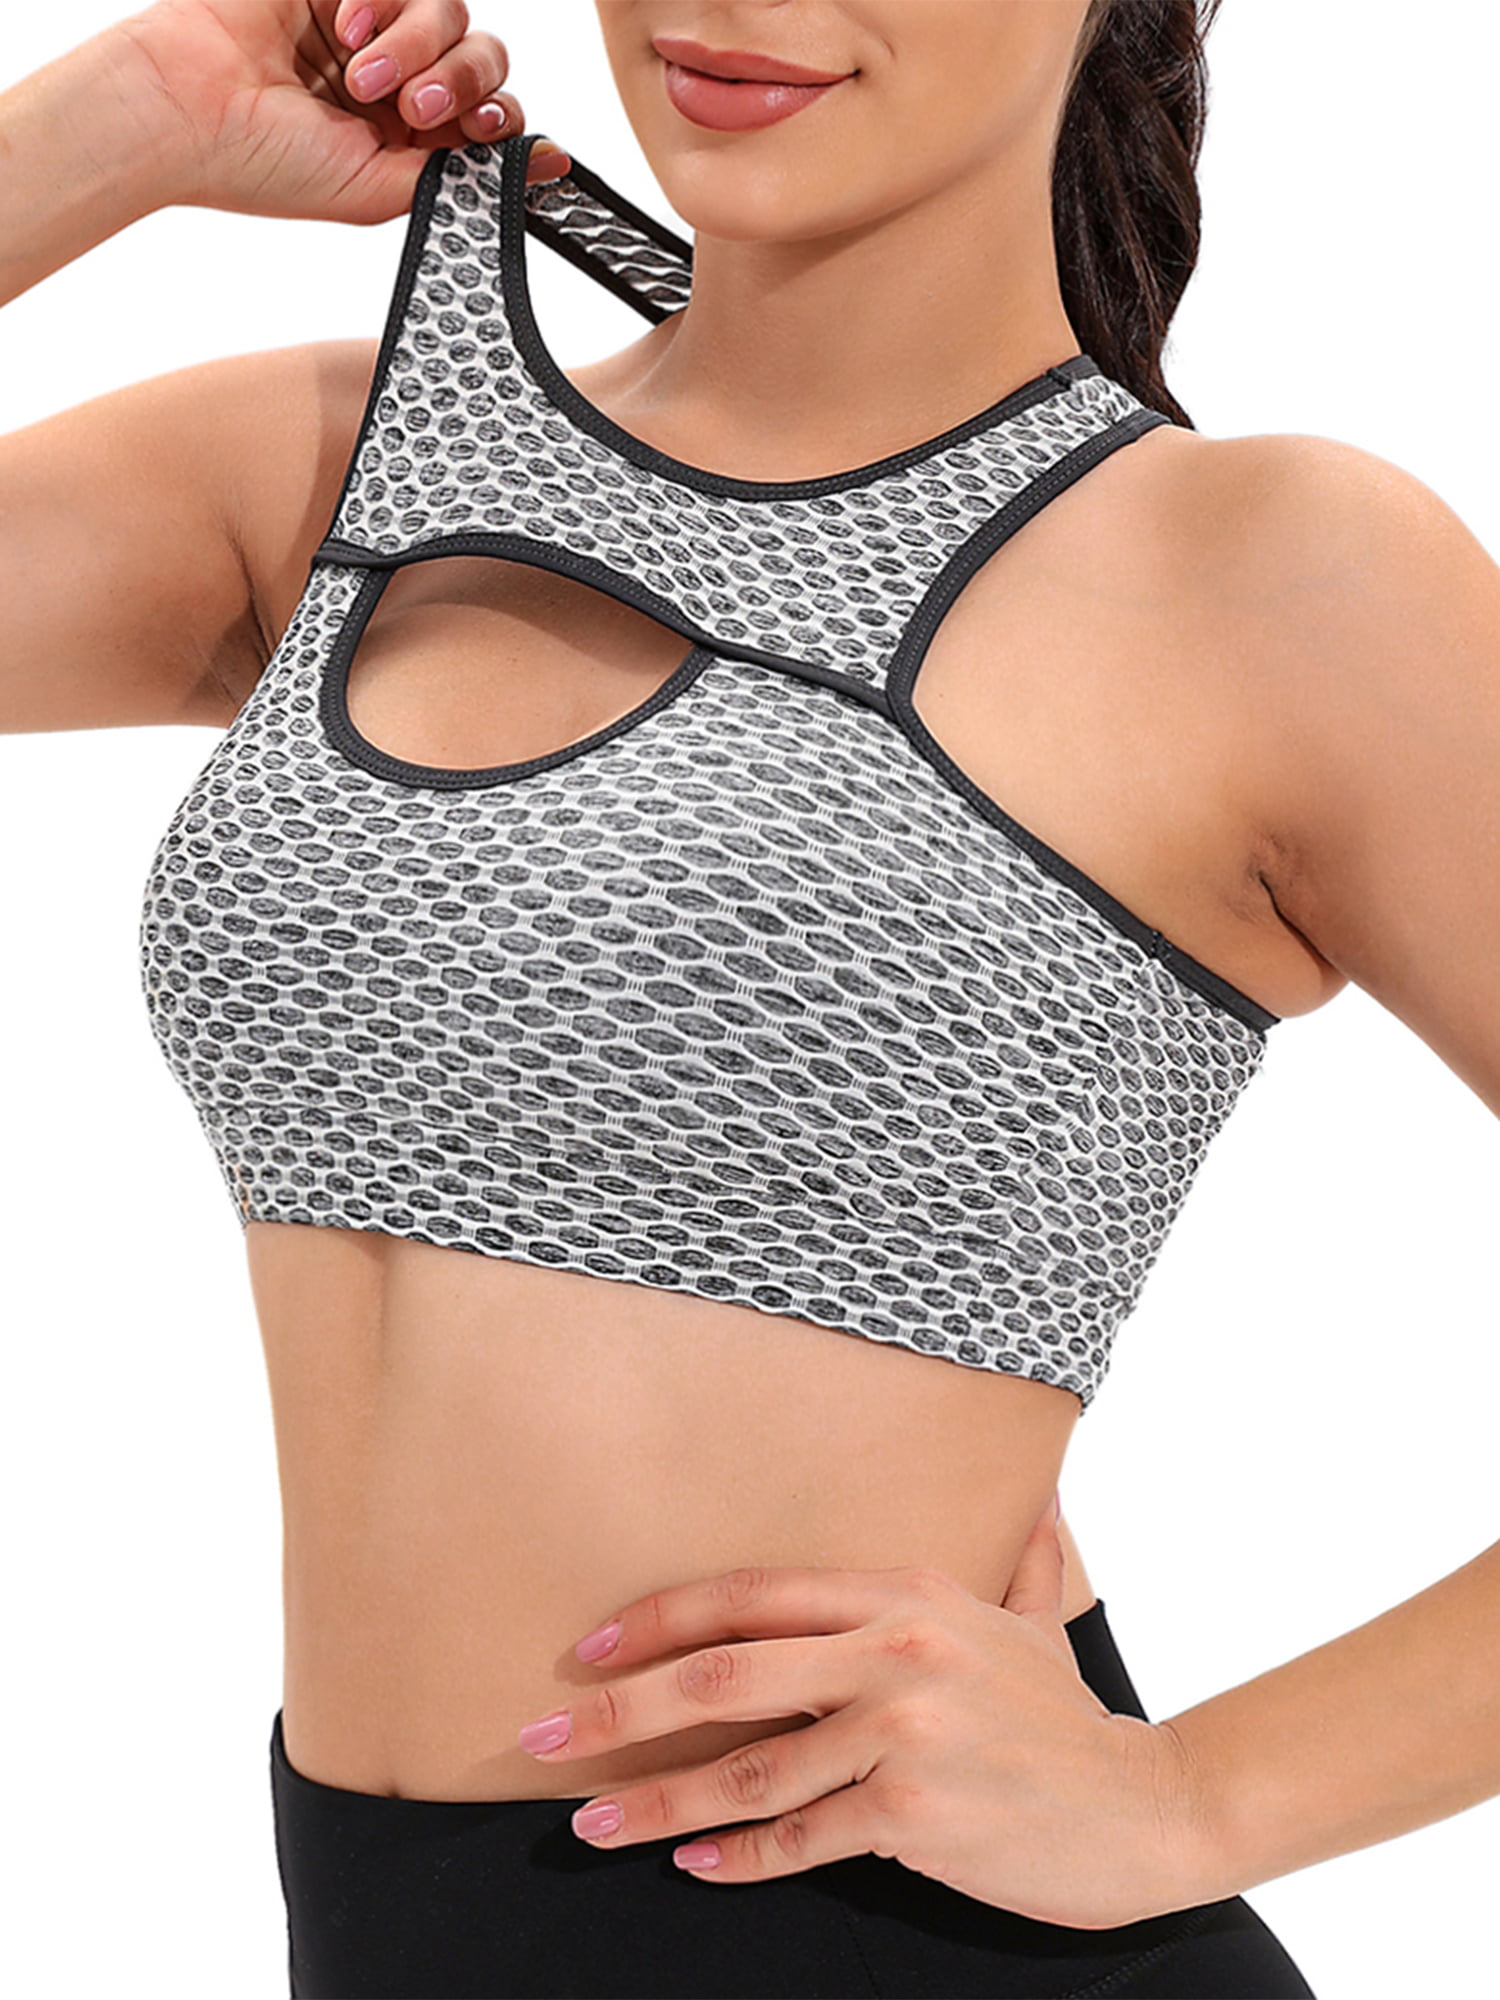 Women's Sports Bra Padded Soft Racerback Stretch Crop Top Vest with  Removable Soft Padded Cups Lace Yoga Activewear